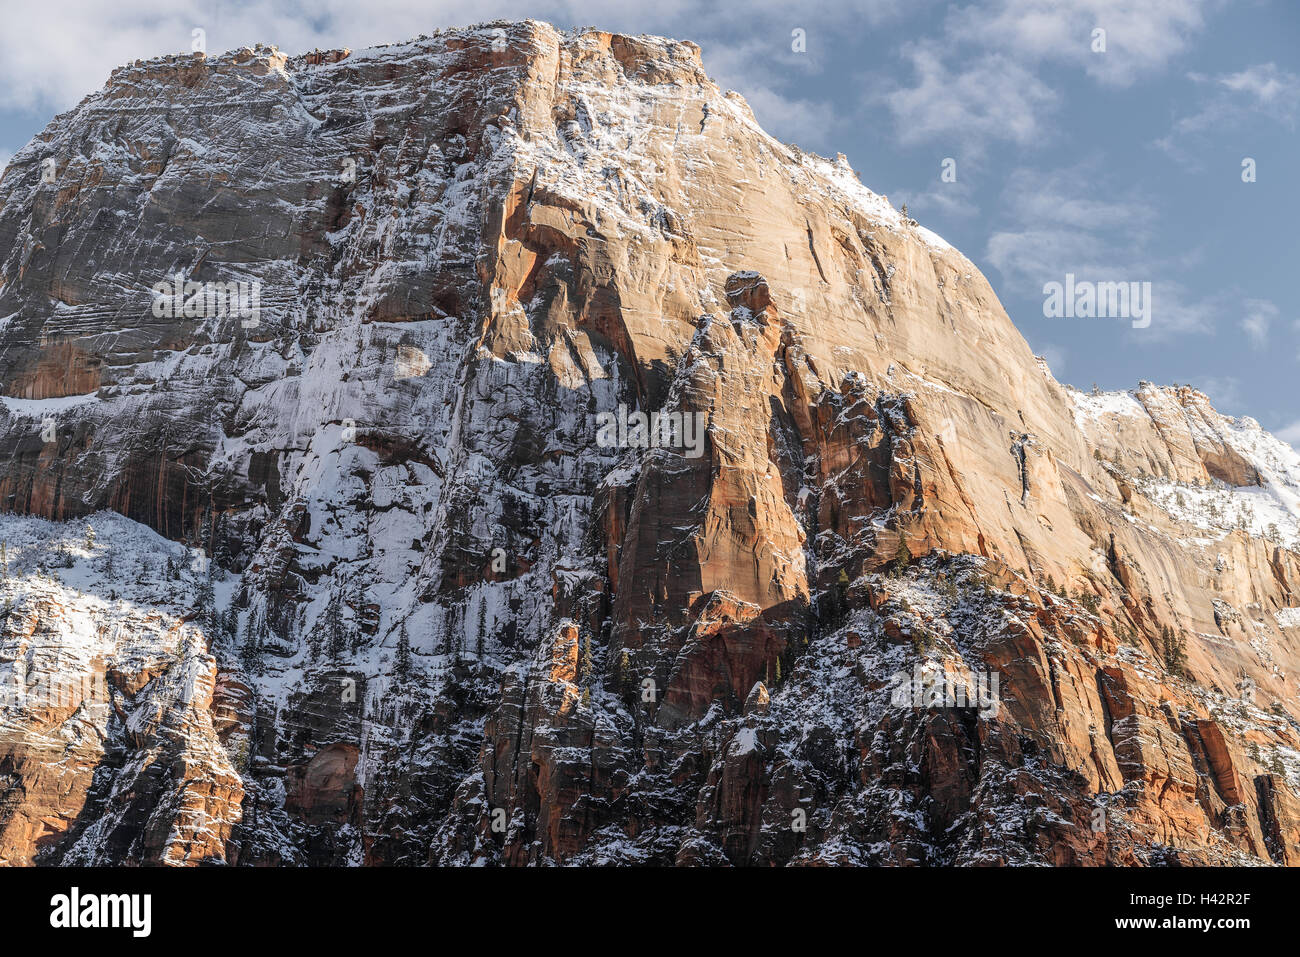 A snowy day in Utah's Zion National Park Stock Photo